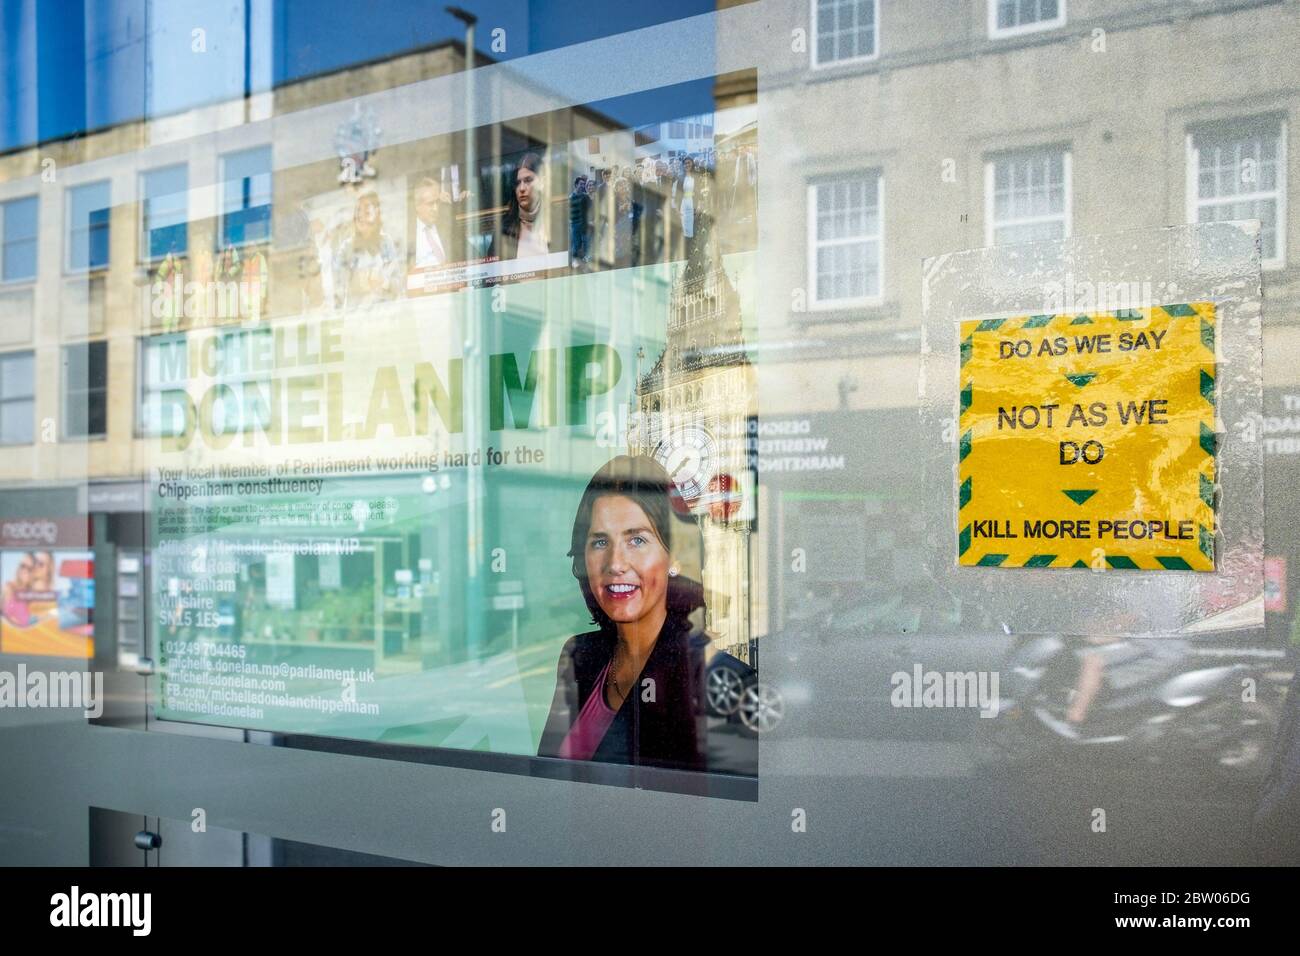 Chippenham, Wiltshire UK, 28th May, 2020. As Boris Johnson faces growing anger over Dominic Cummings, an anti tory sticker is pictured on the window of the Constituency Office of Michelle Donelan the conservative MP for the Chippenham Constituency. Credit: Lynchpics/Alamy Live News Stock Photo